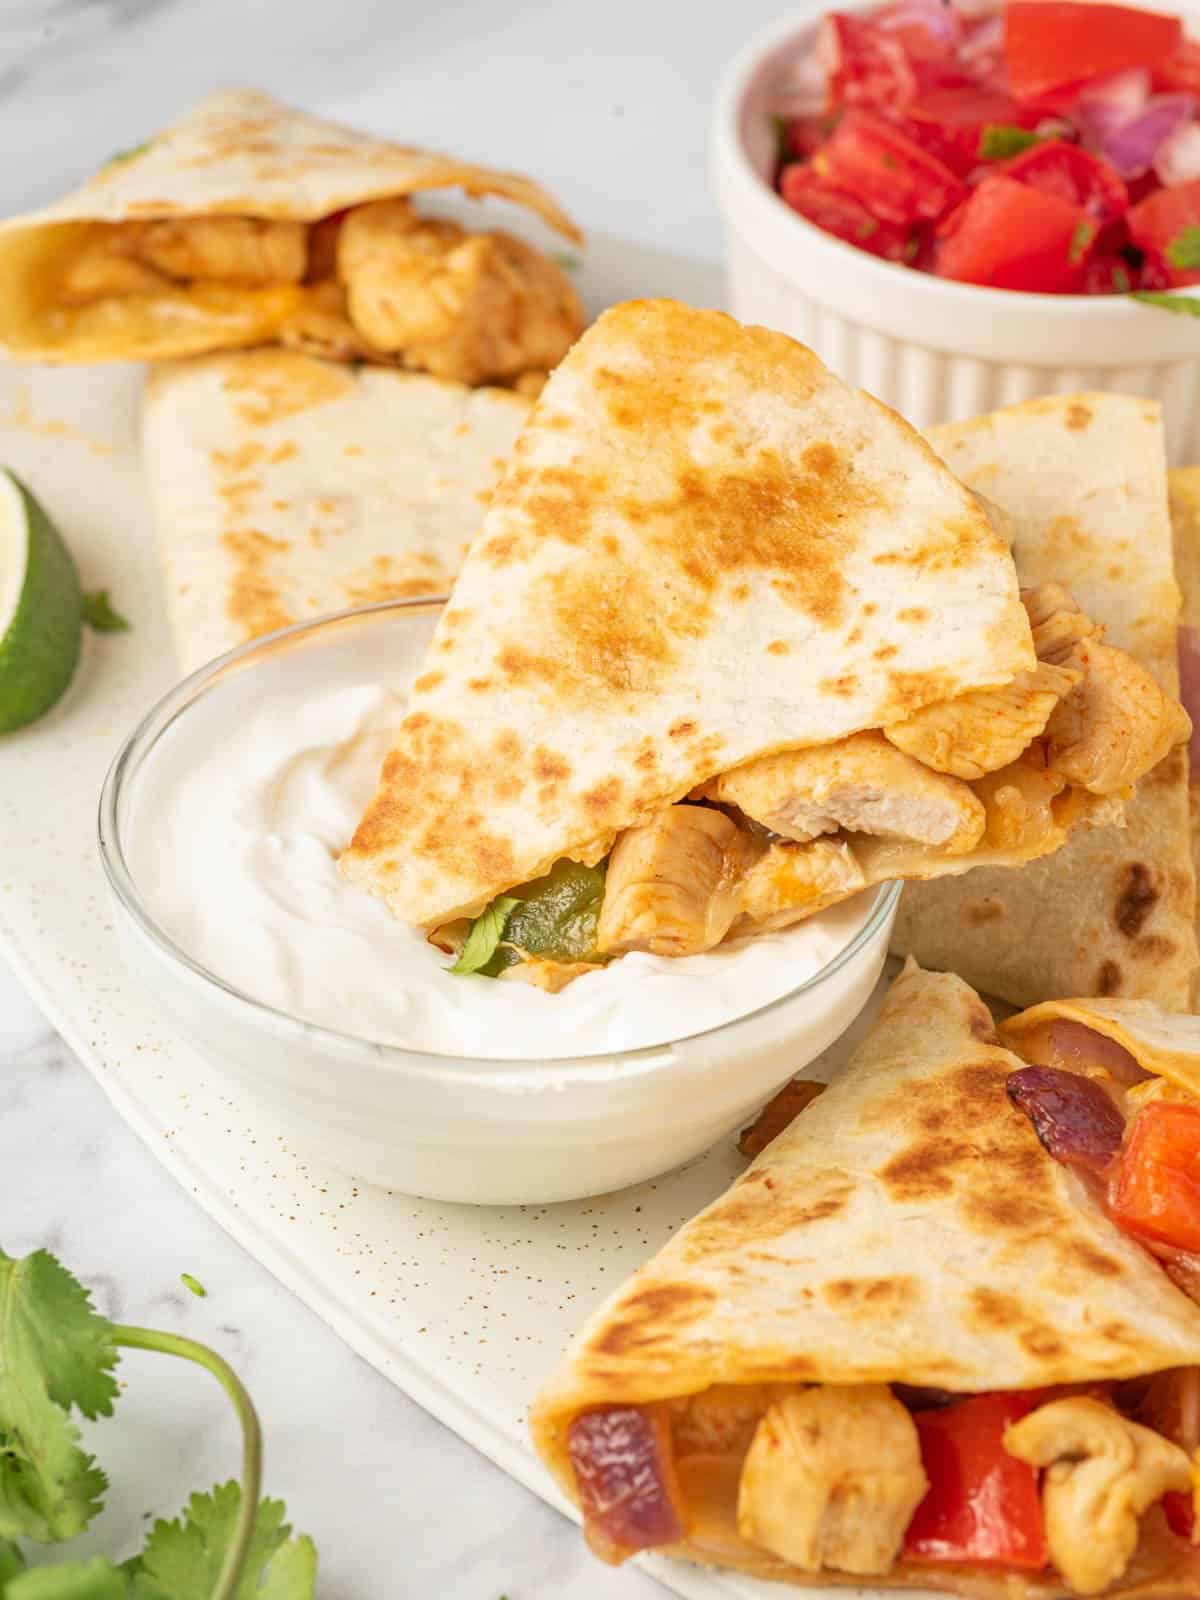 A triangle of chicken and cheese quesadilla being dipped into sour cream.